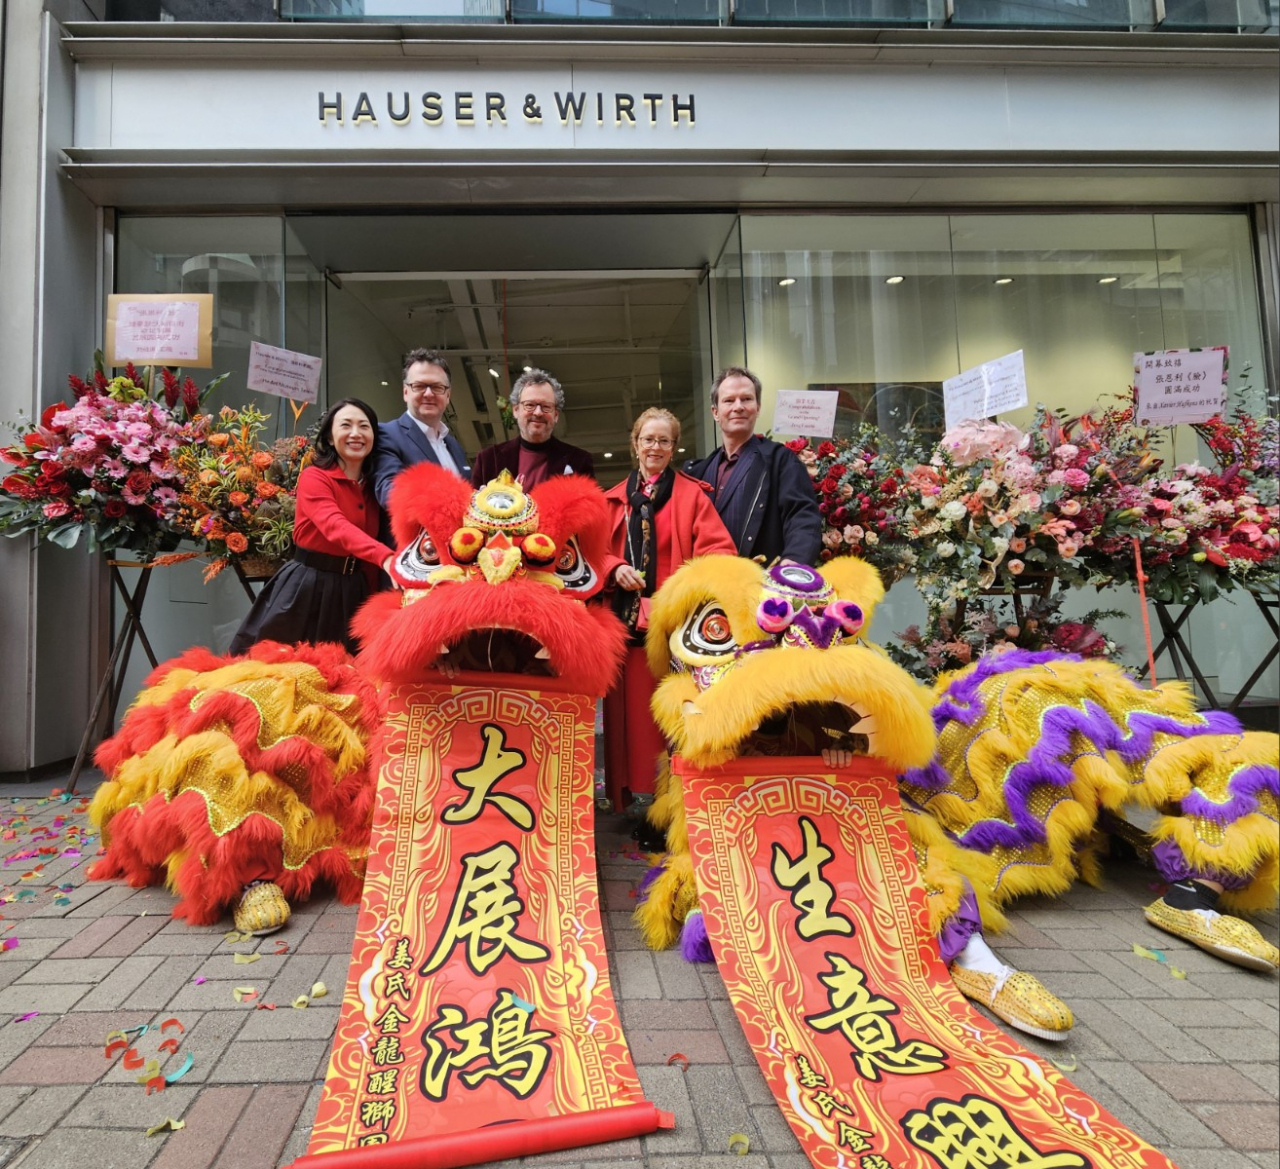 (from left) Elaine Kwok, Asia Managing Partner; Ewan Venters, CEO; Iwan Wirth, Manuela Wirth and Marc Payot, co-presidents of Hauser & Wirth take a group photo after a lion dance opening ceremony on Wednesday at the new Hong Kong location at 8 Queen’s Road Central. (Park Yuna/The Korea Herald)